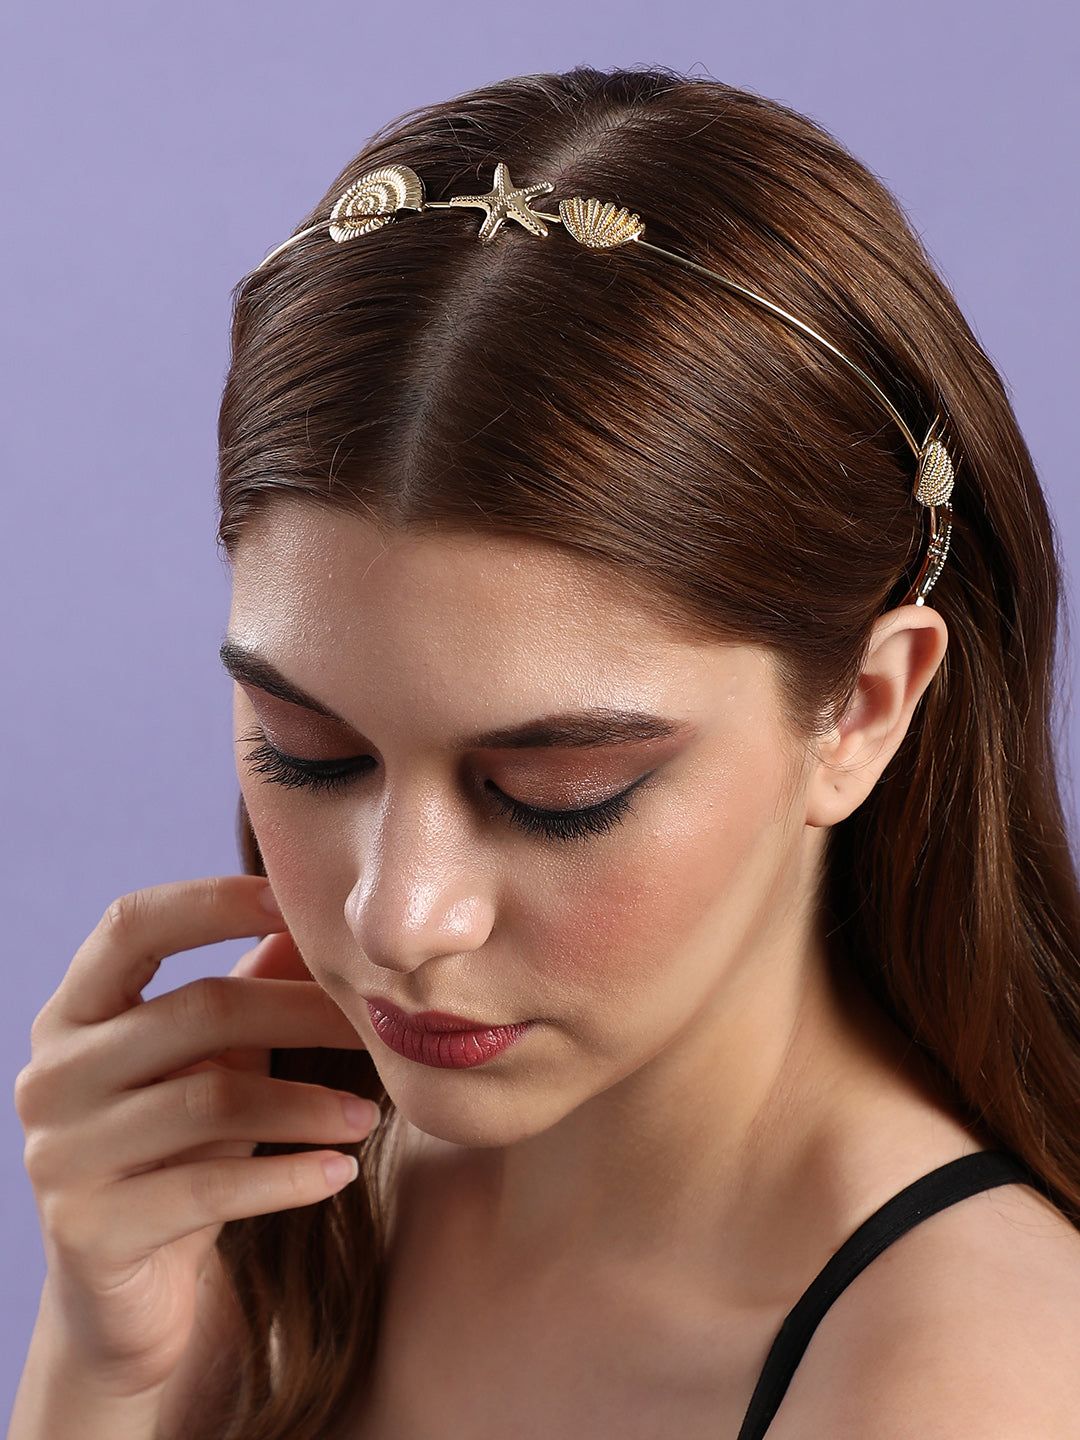 Bedazzled Beauty: Enhancing Hairstyles With An Embellished Hairband